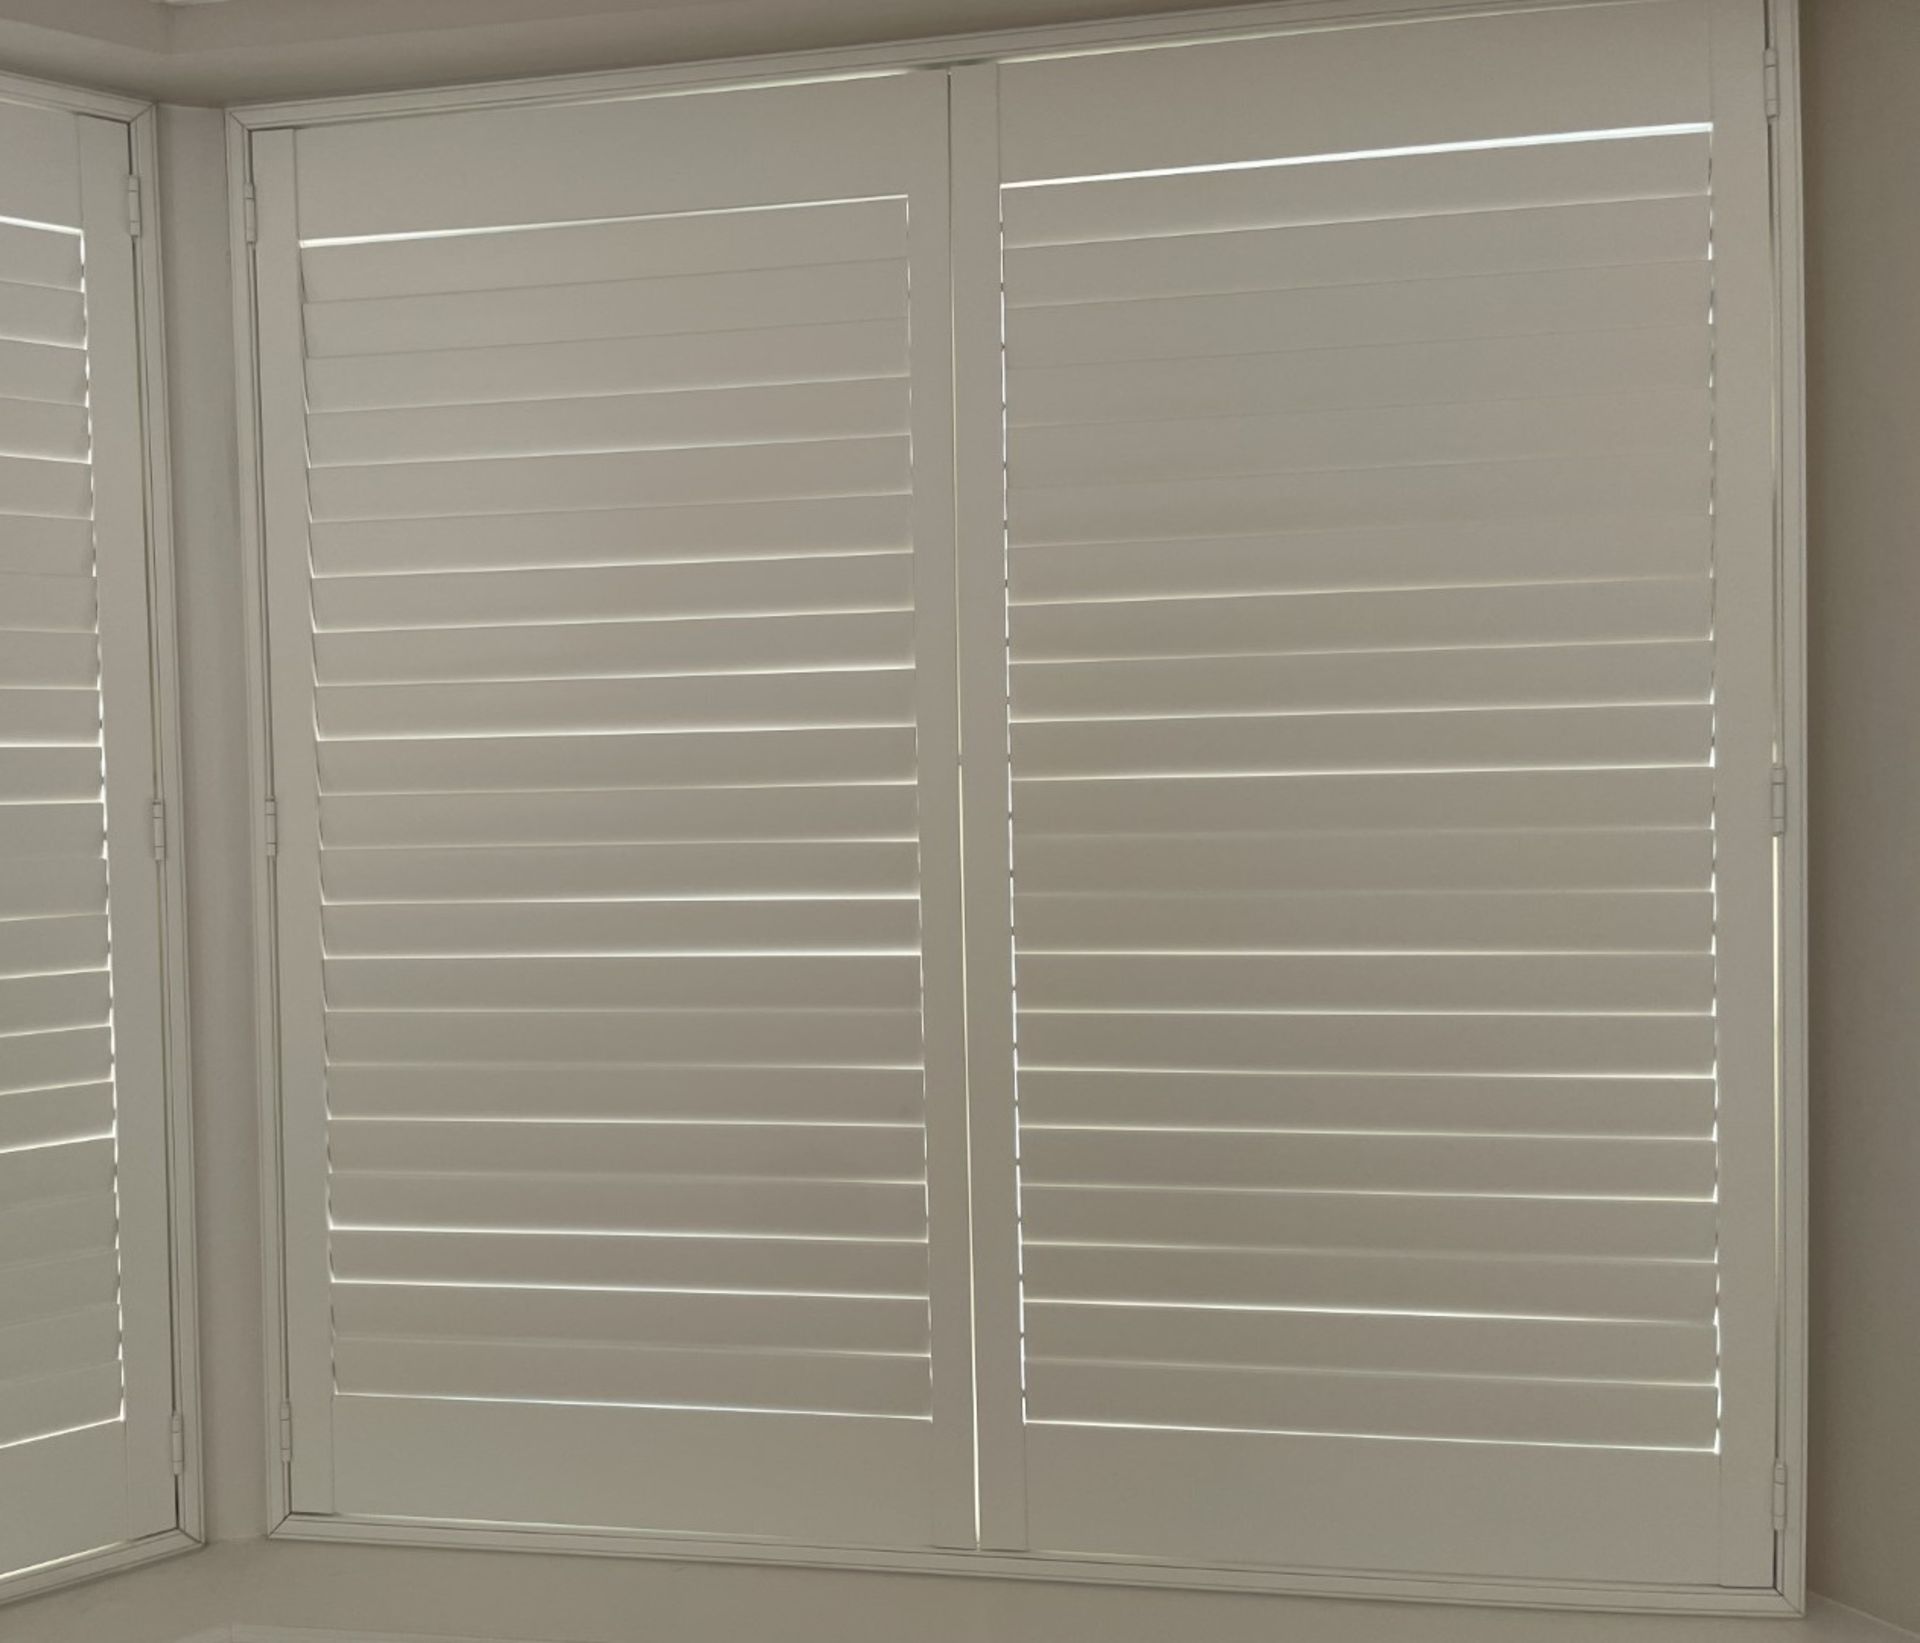 1 x Hardwood Timber Double Glazed Window Frames fitted with Shutter Blinds, In White - Ref: PAN104 - Image 9 of 12